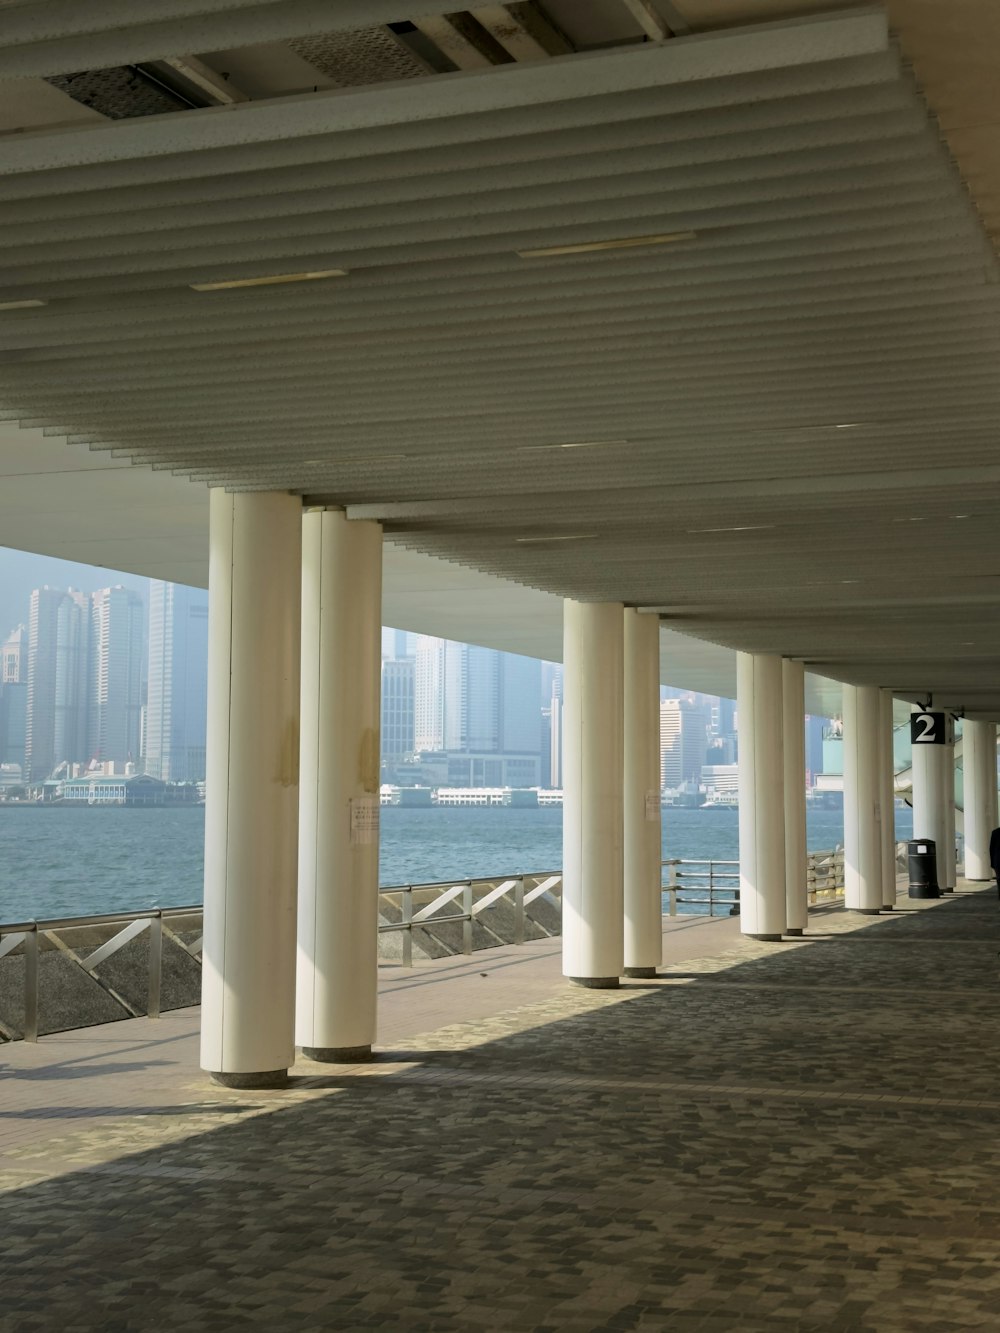 a row of white pillars next to a body of water